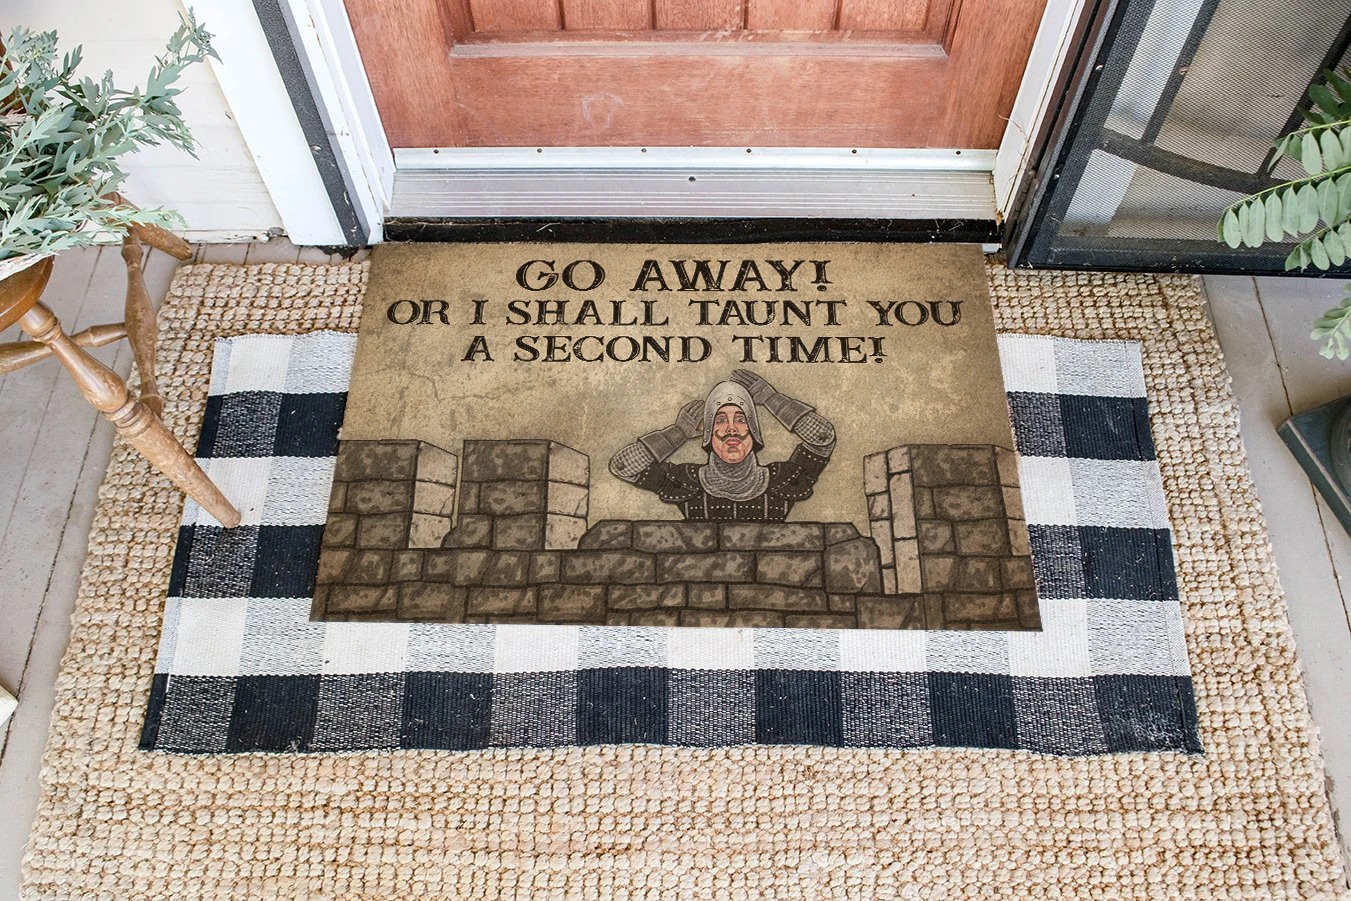 LOTR Go away or i shall taunt you a second time doormat